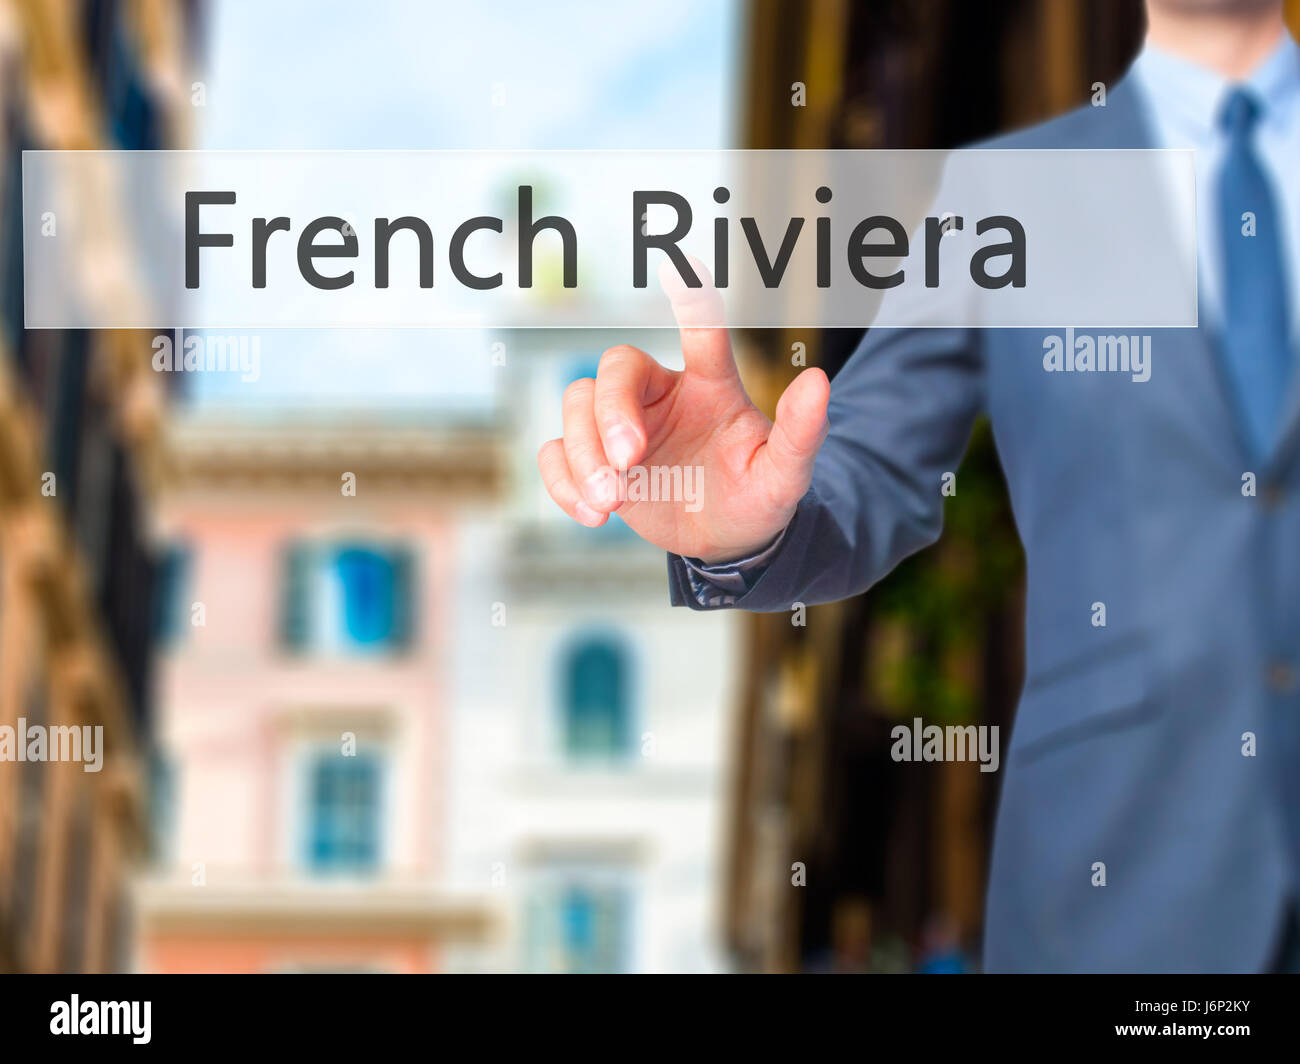 French Riviera - Businessman hand pressing button on touch screen interface. Business, technology, internet concept. Stock Photo Stock Photo